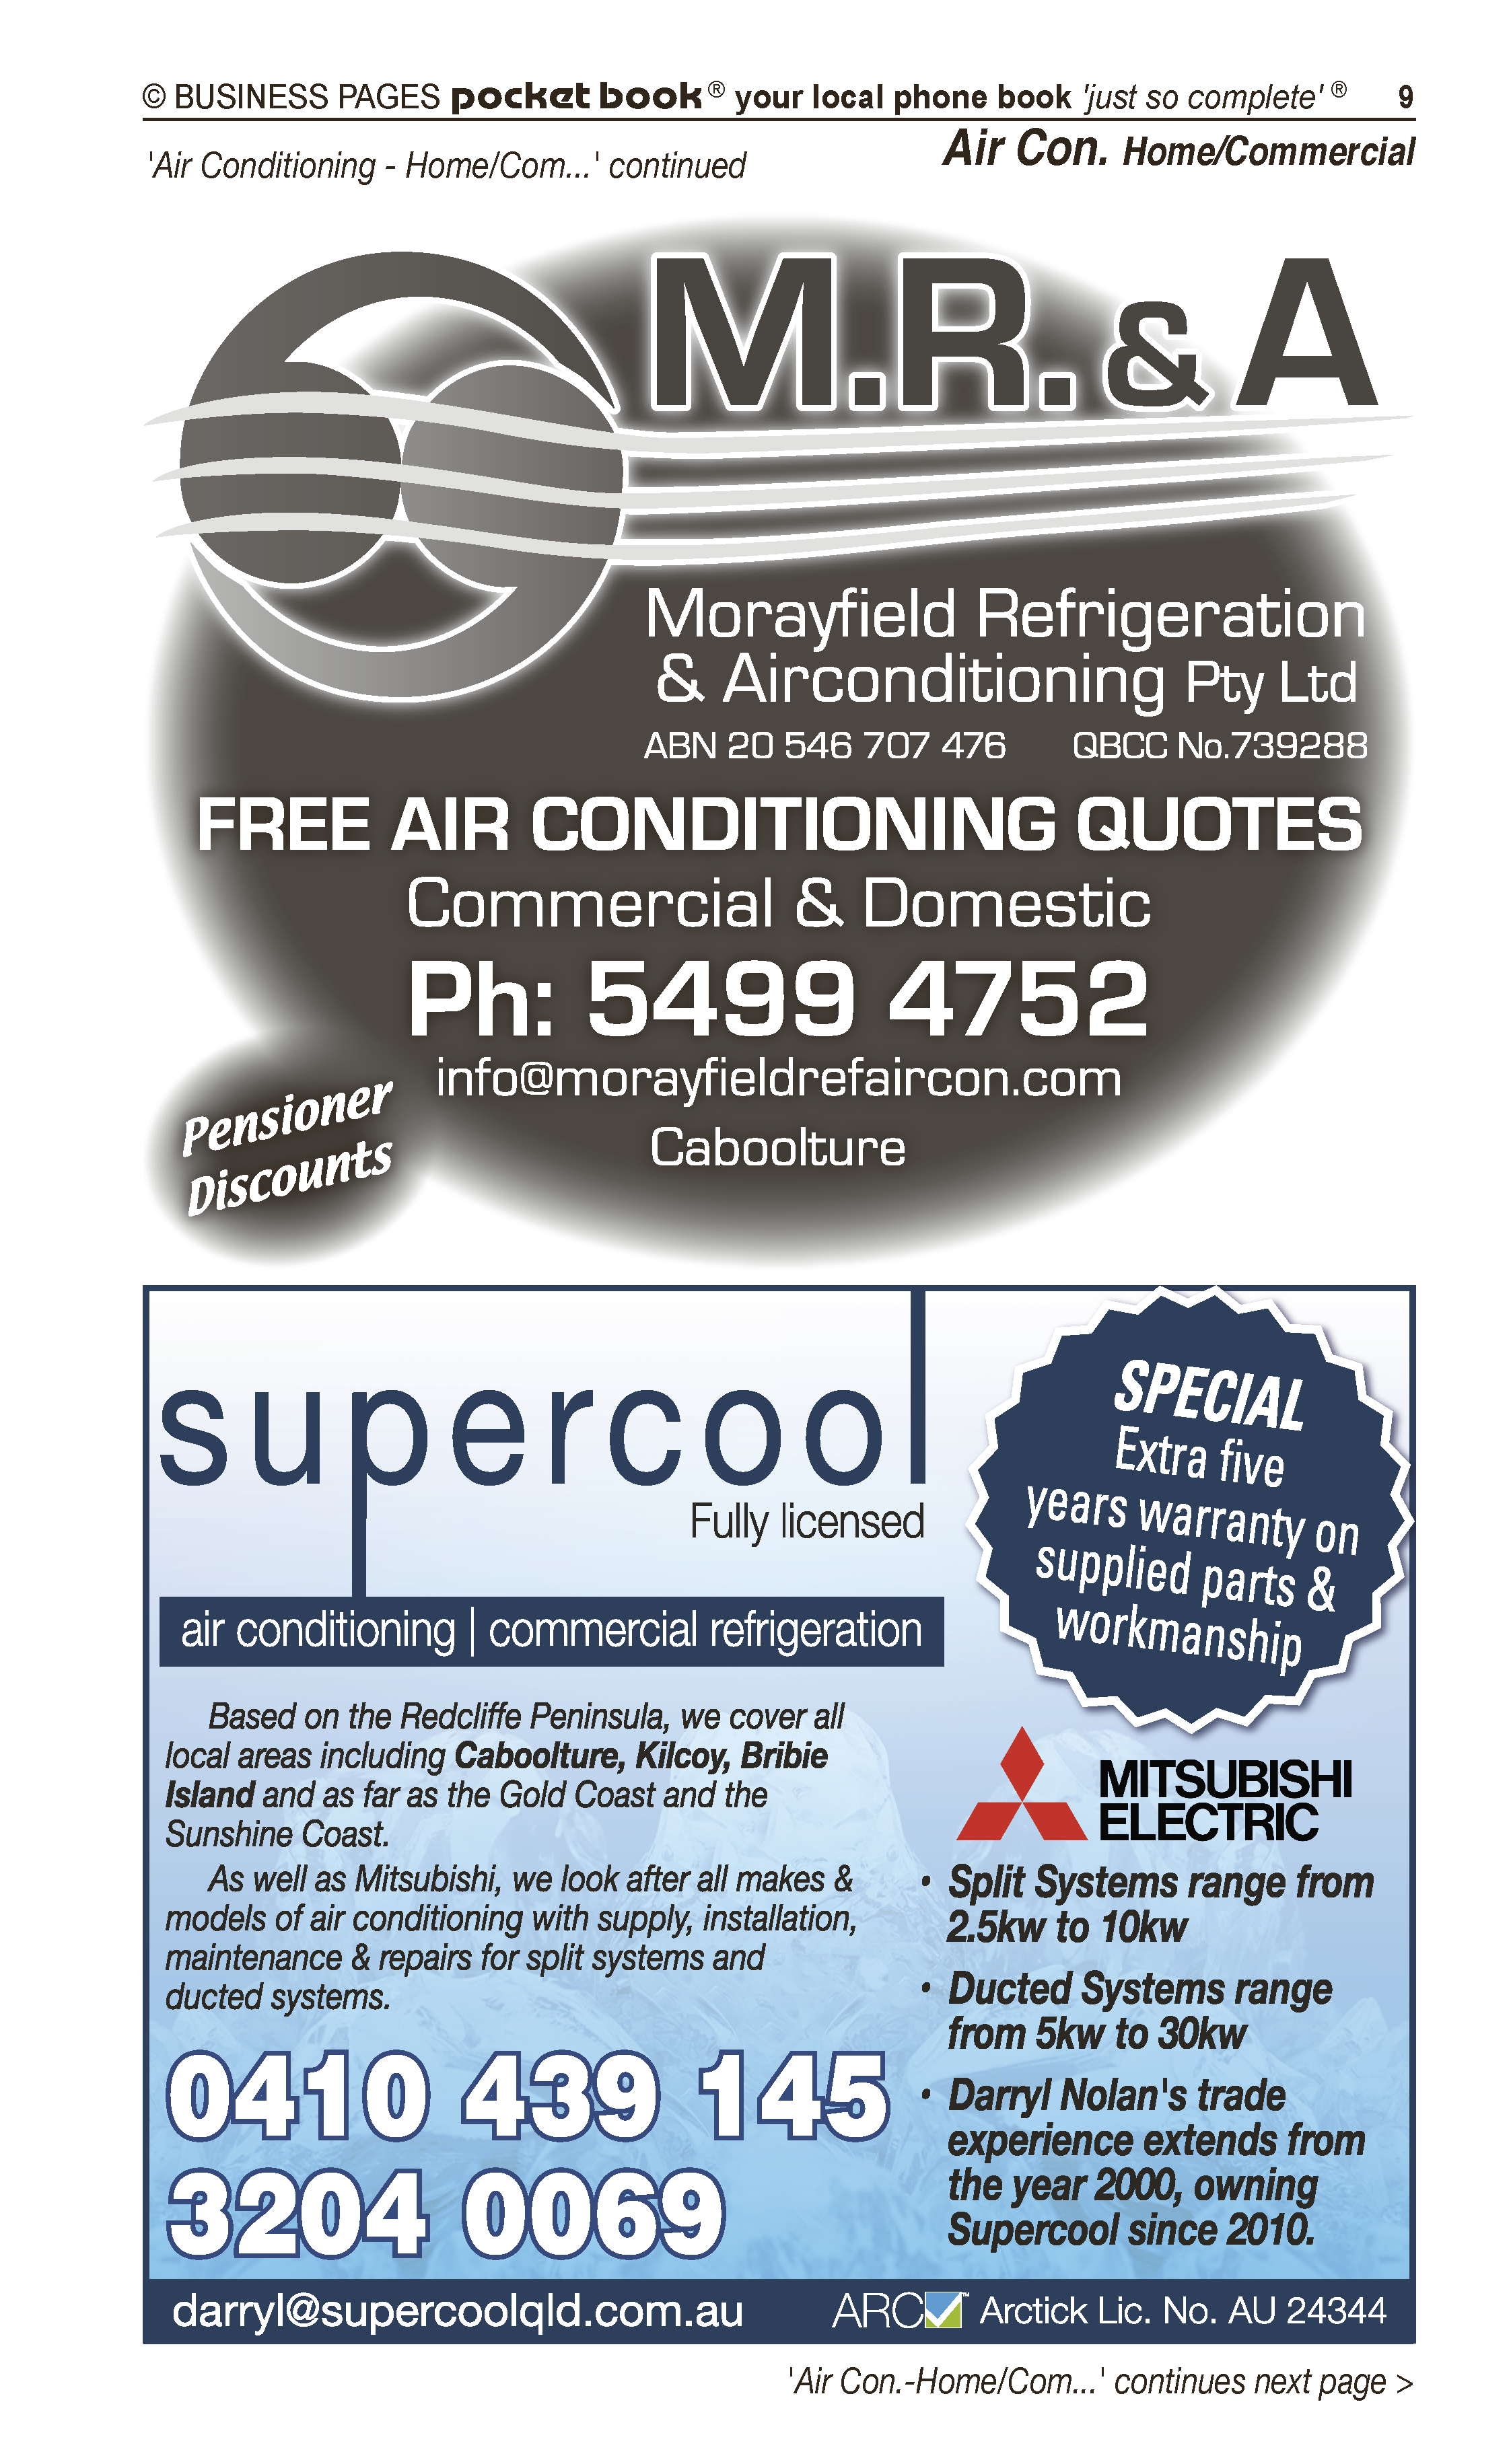 Morayfield Refrigeration & Airconditioning Pty Ltd | Air Conditioning – Home & Commercial in Upper Caboolture | PBezy Pocket Books local directories - page 9